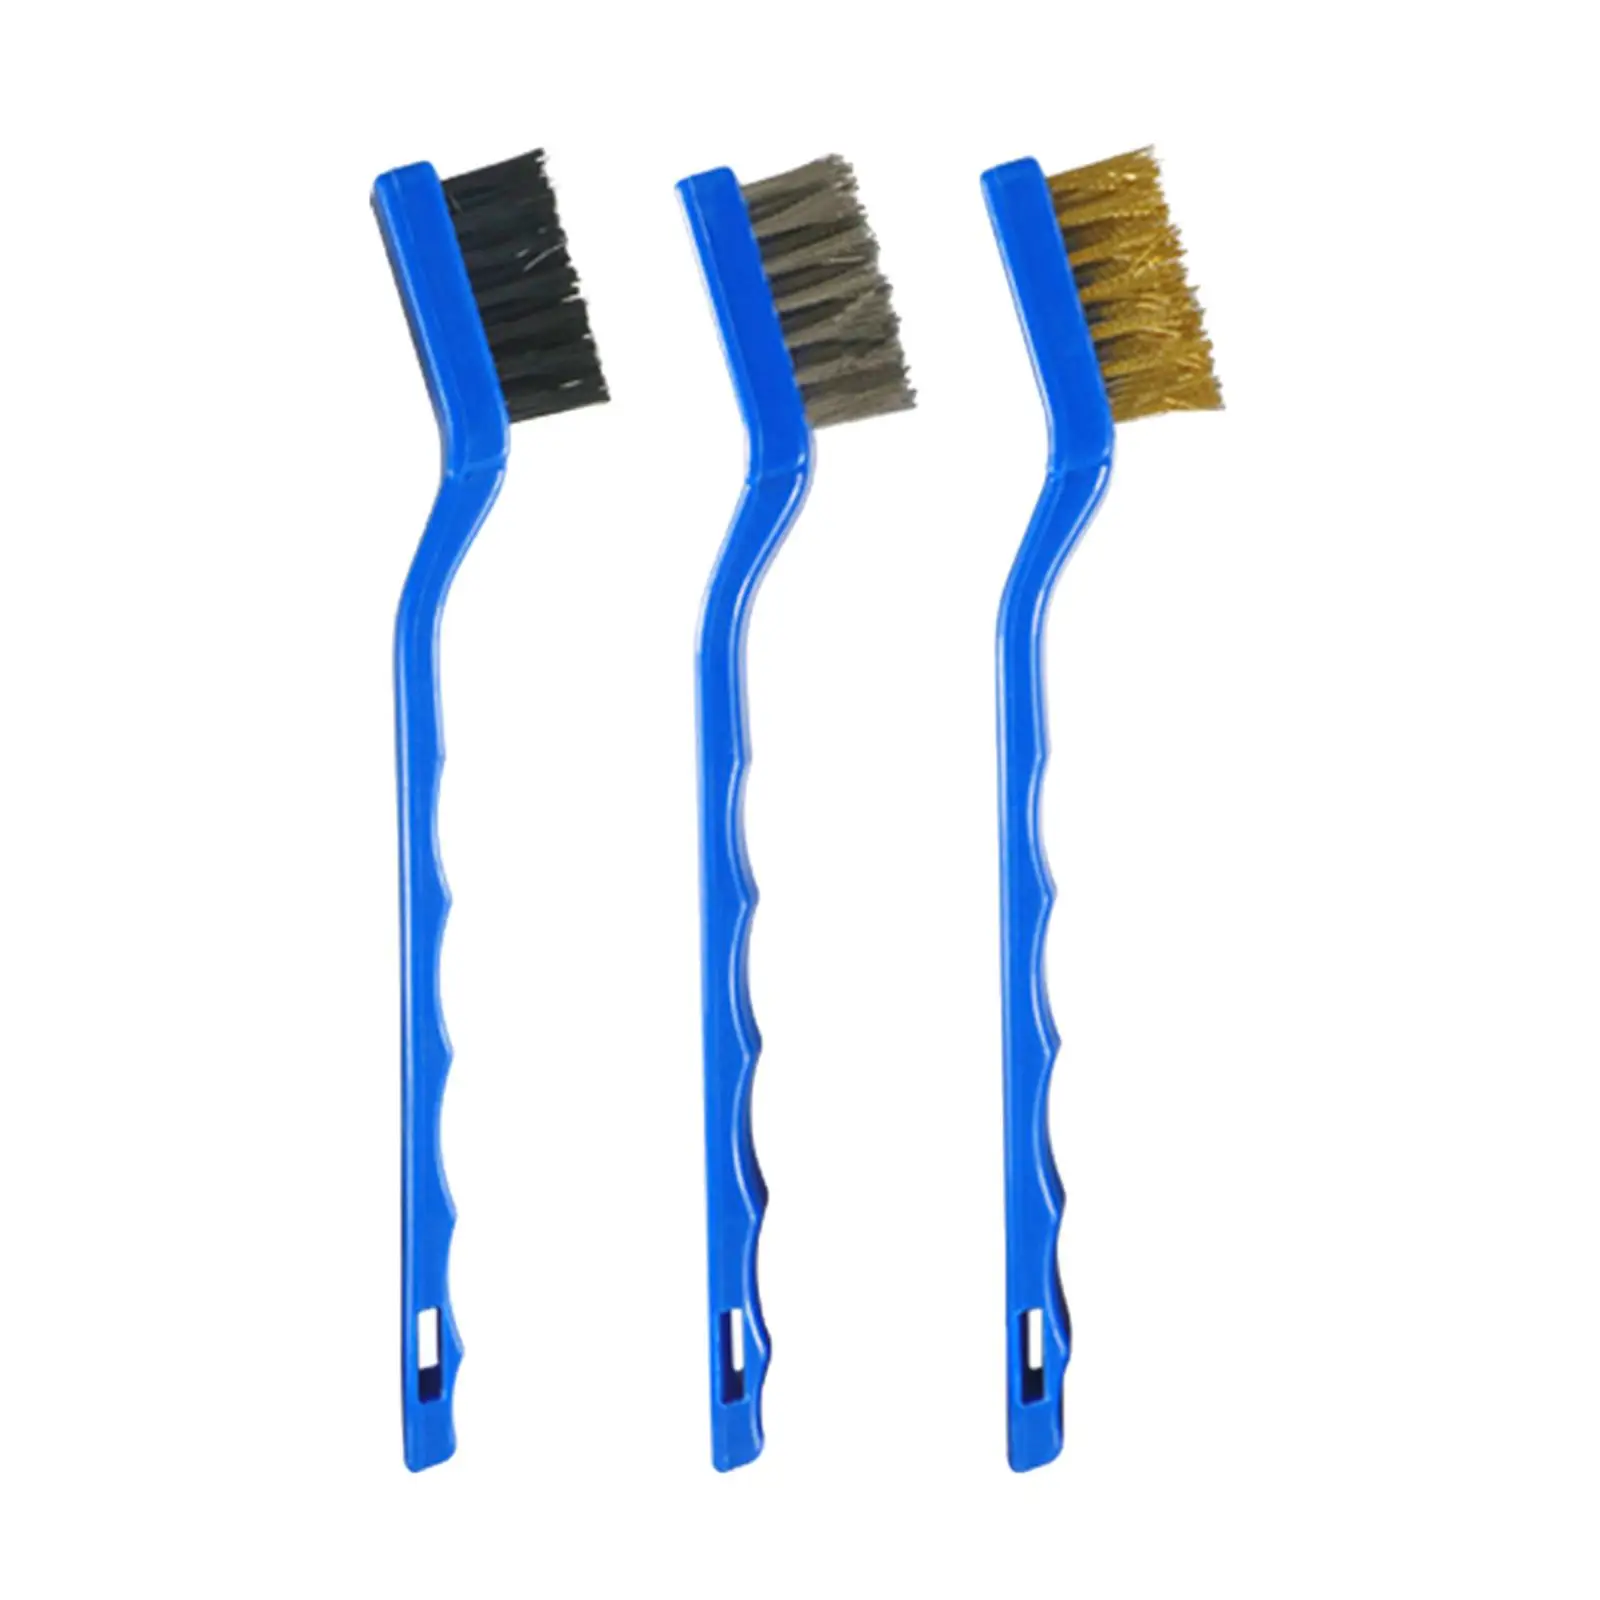 3x Car Engine Cleaning Brushes, Car Detailing Brushes Handy Tool Professional